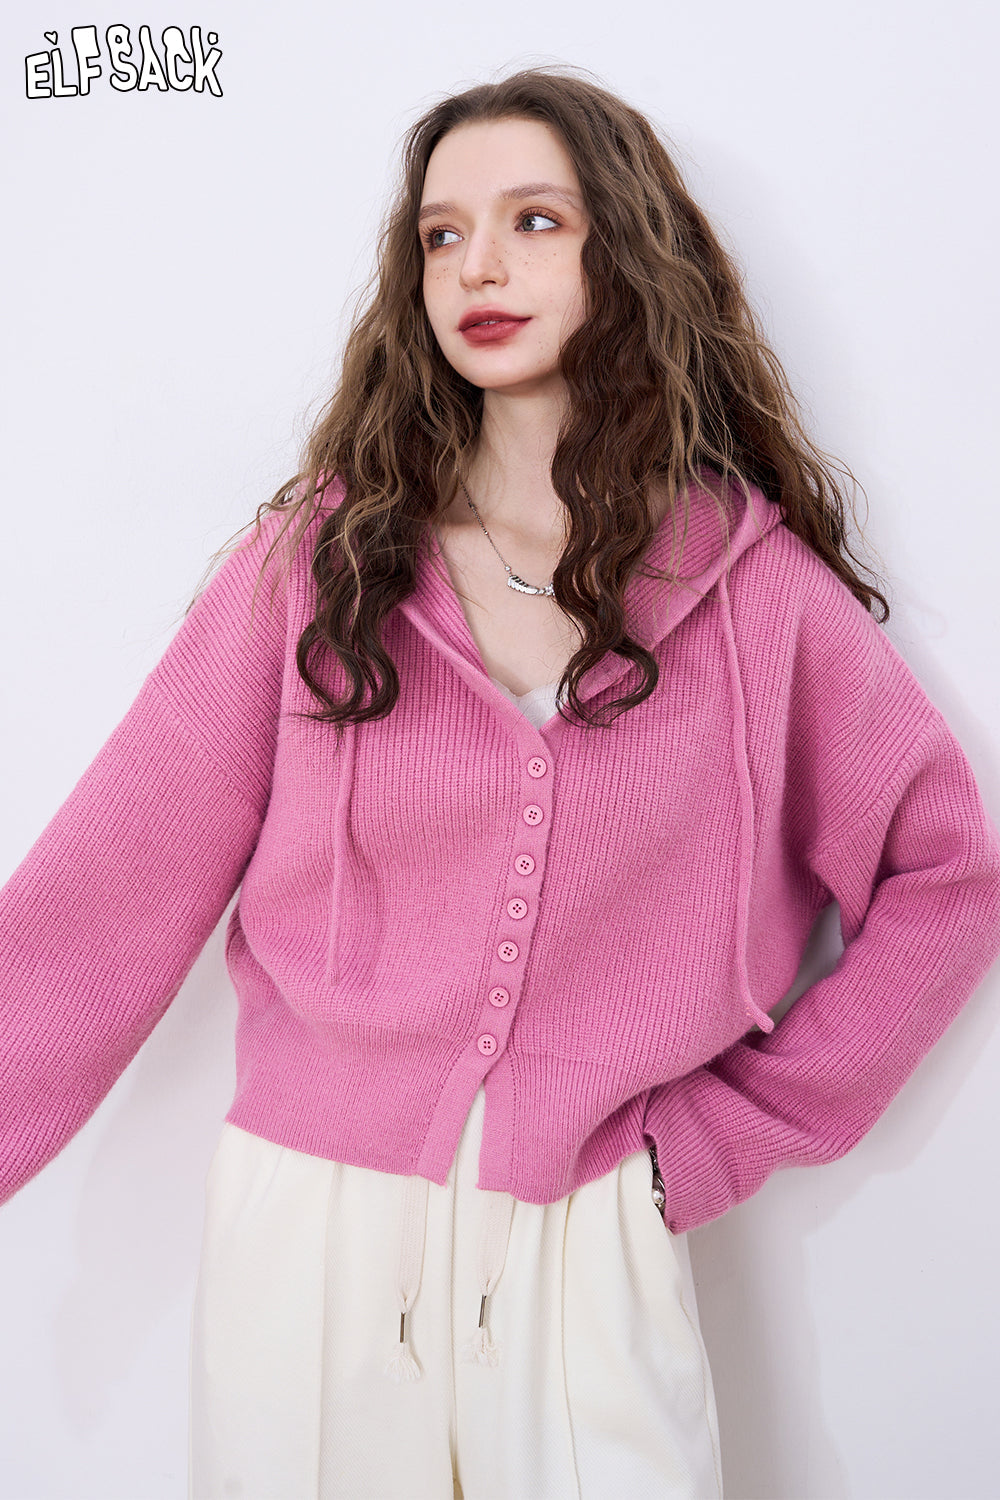 
                  
                    ELFSACK Hooded Sweater Cardigan Loose Fit V-Neck Short Pink Knitwear Layering Piece
                  
                